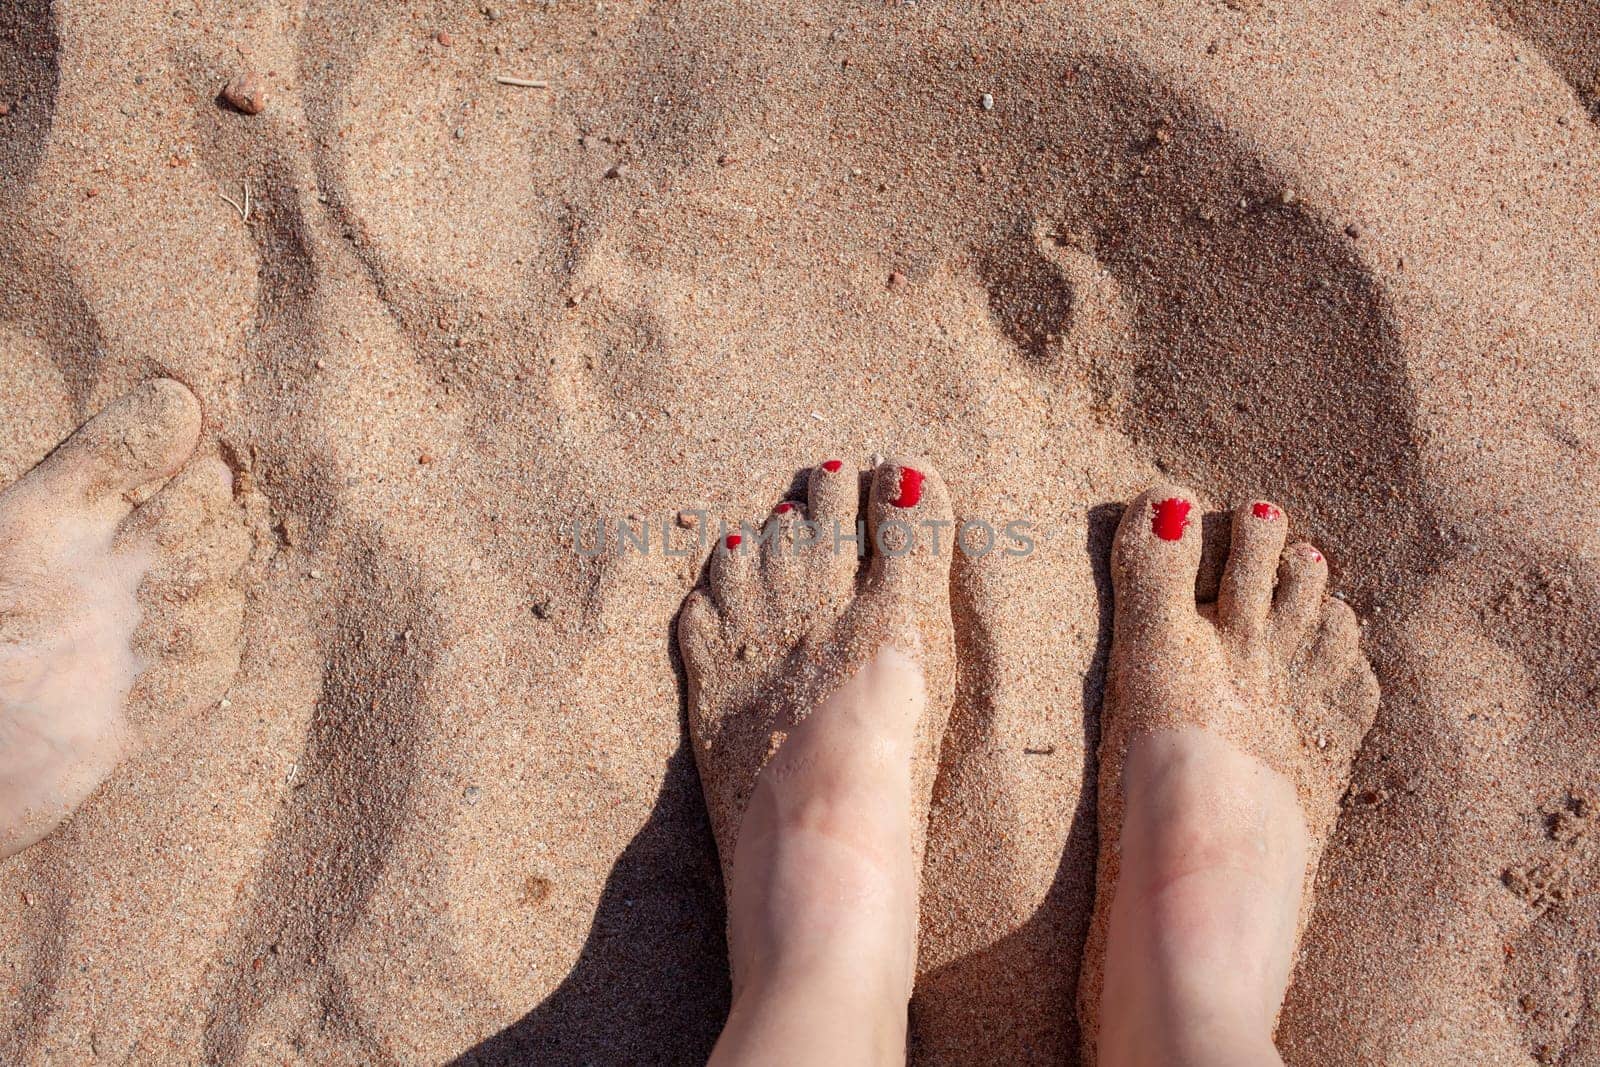 Top view of feet in the sand on a sledge. A woman or a man is standing on the sand. Summer holidays.